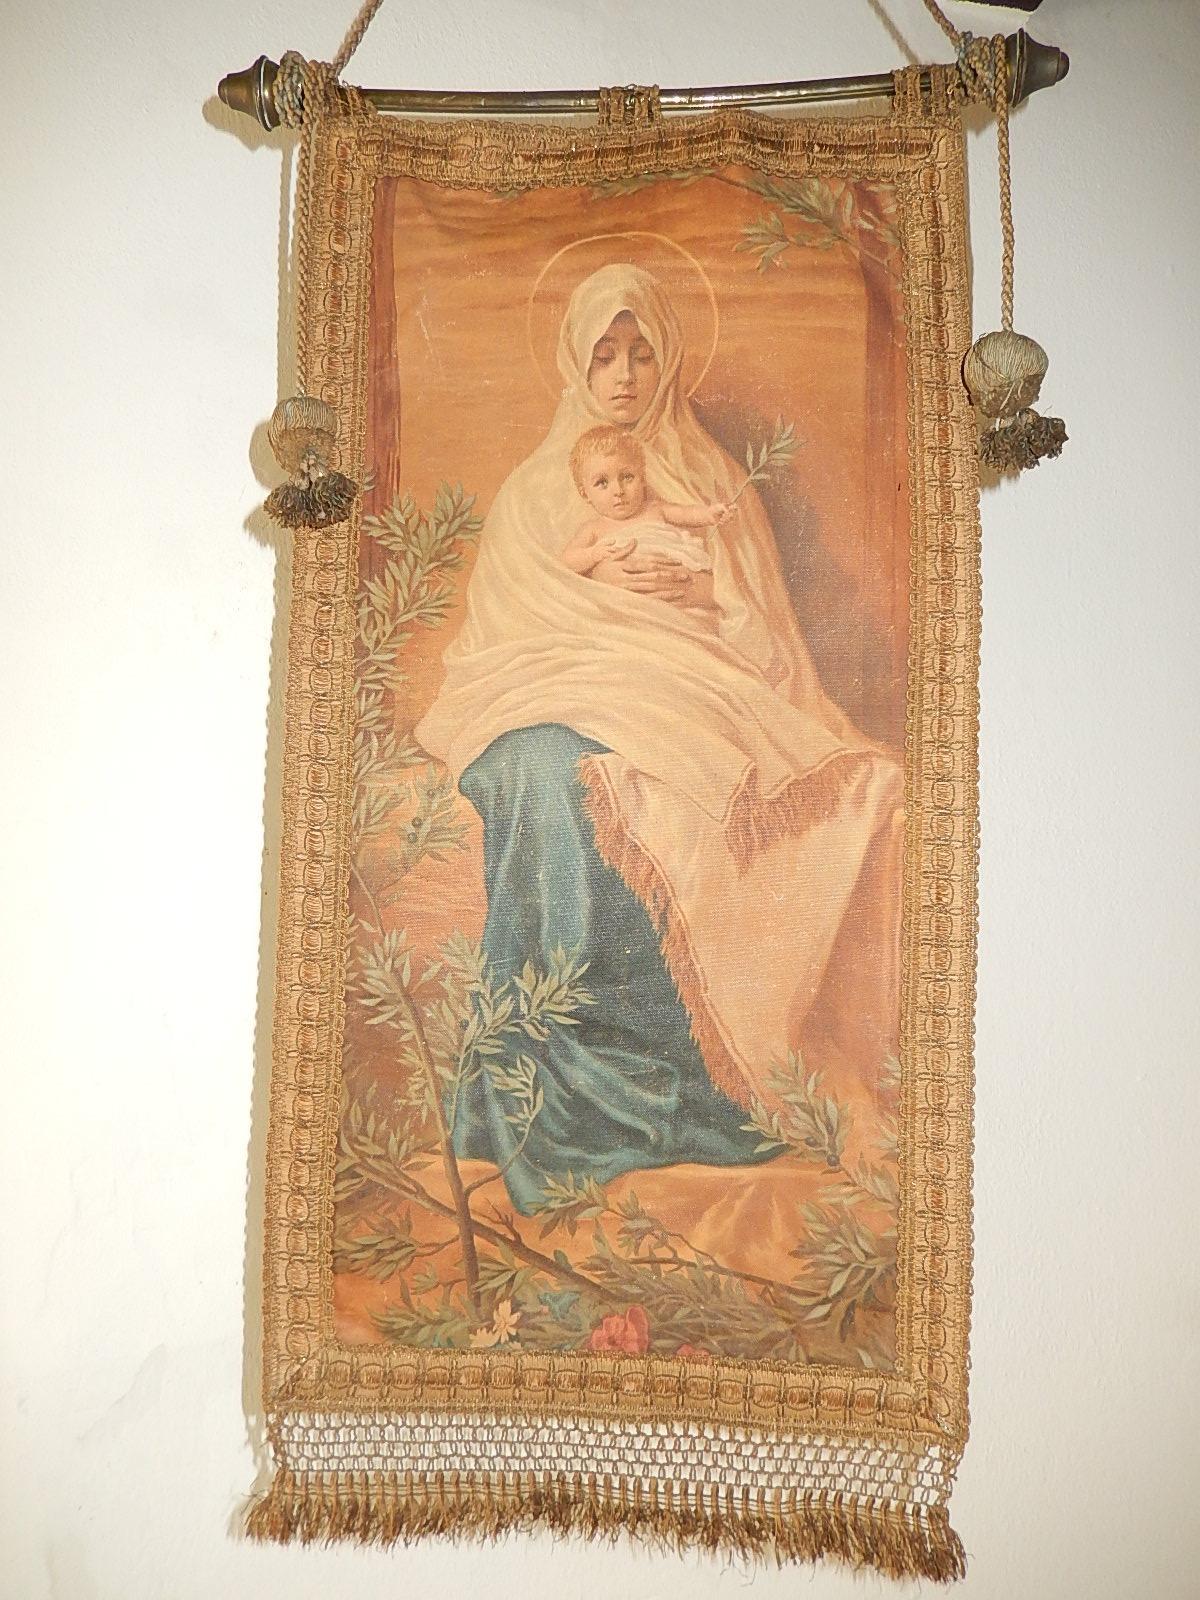 Beautiful oleograph of Mary and Jesus. Flowers on border. Embroidery still in great shape with gold thread. Original tassels and bar on top. Measurement is only the banner, not the extra rope that can be lengthened or shortened. Free priority UPS